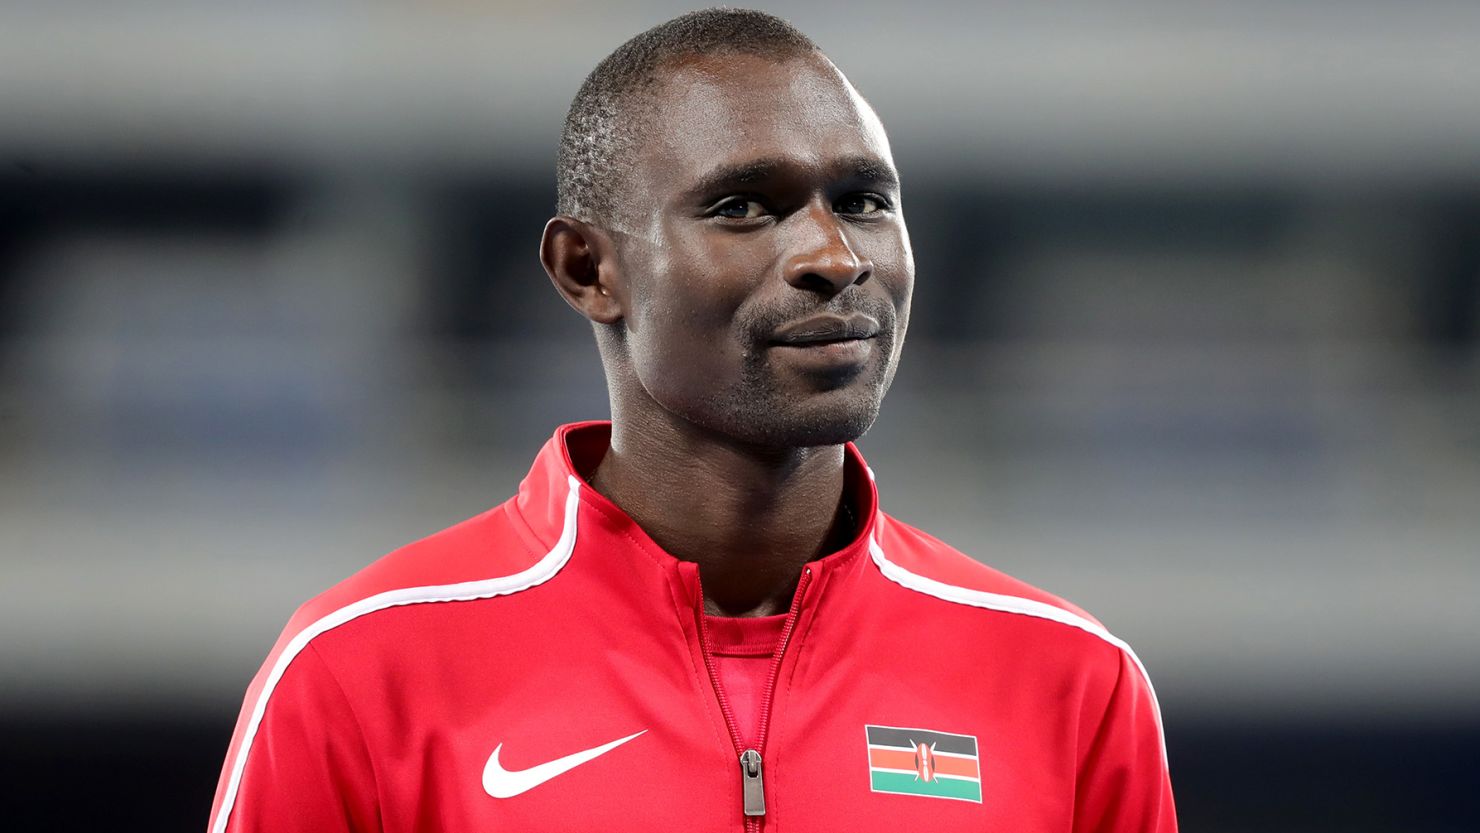 Double Olympic gold medalist David Rudisha tells CNN he was "lucky" to survive the plane crash.